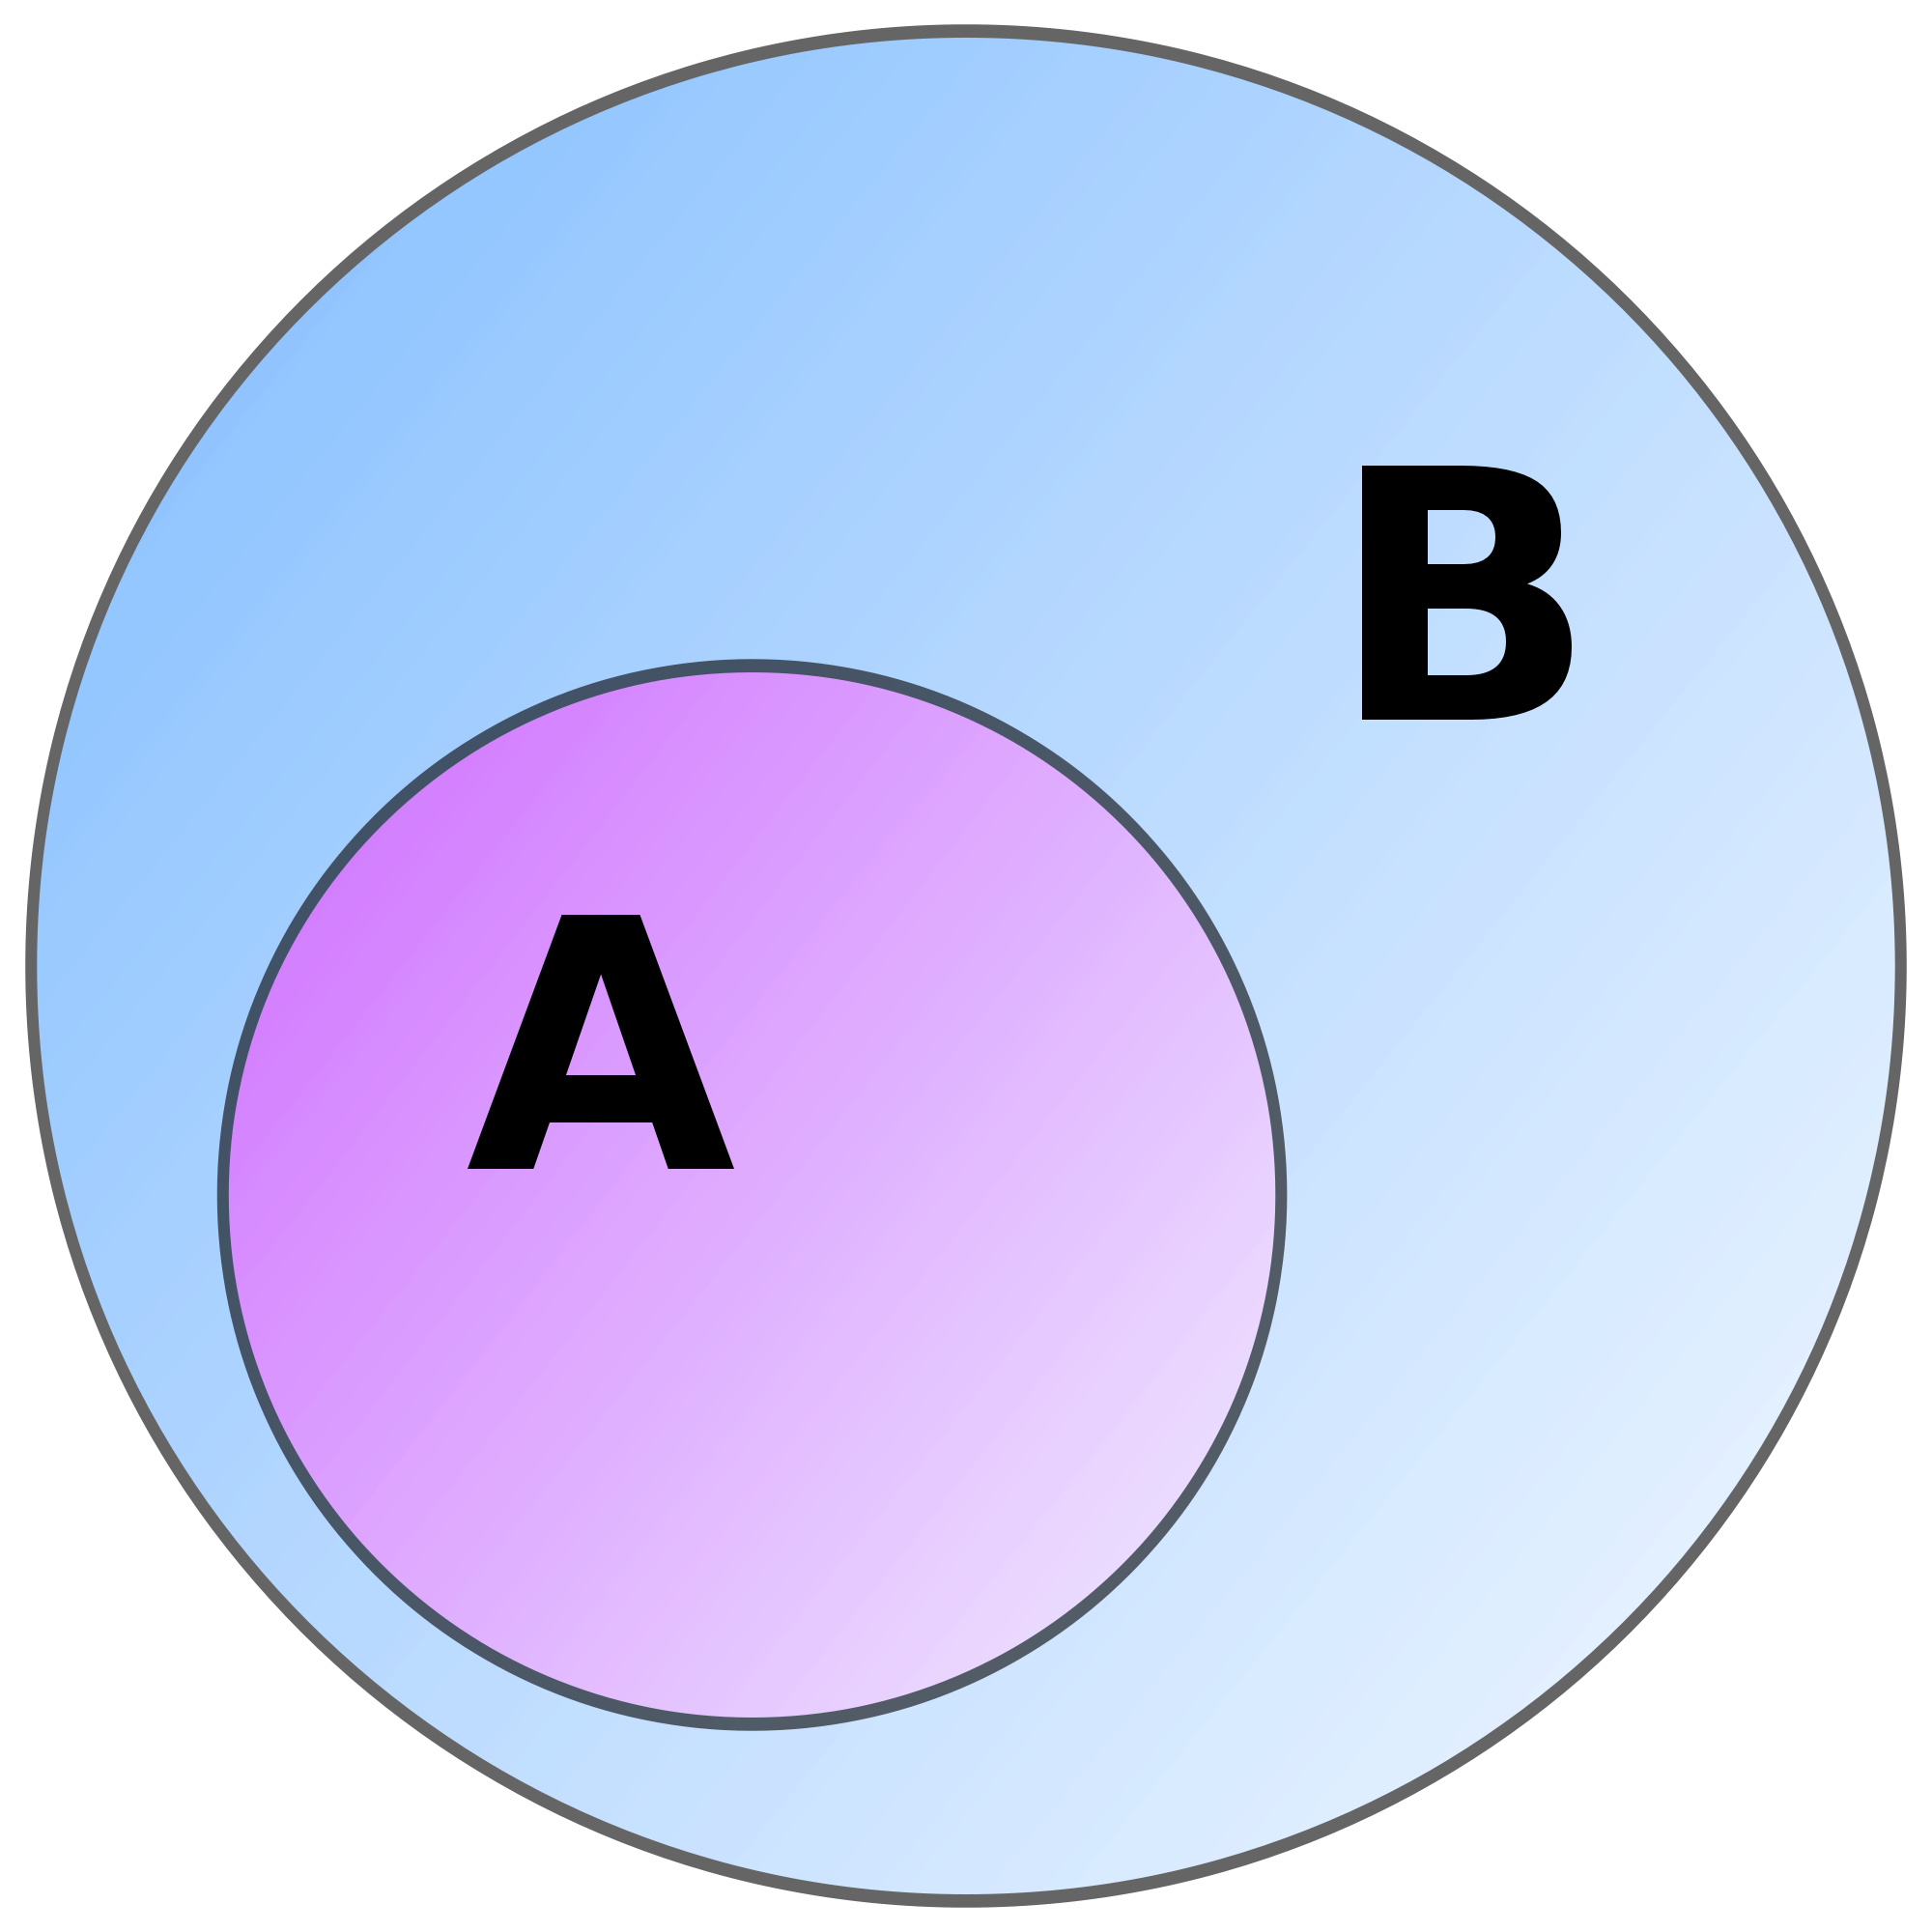 A is a subset of B